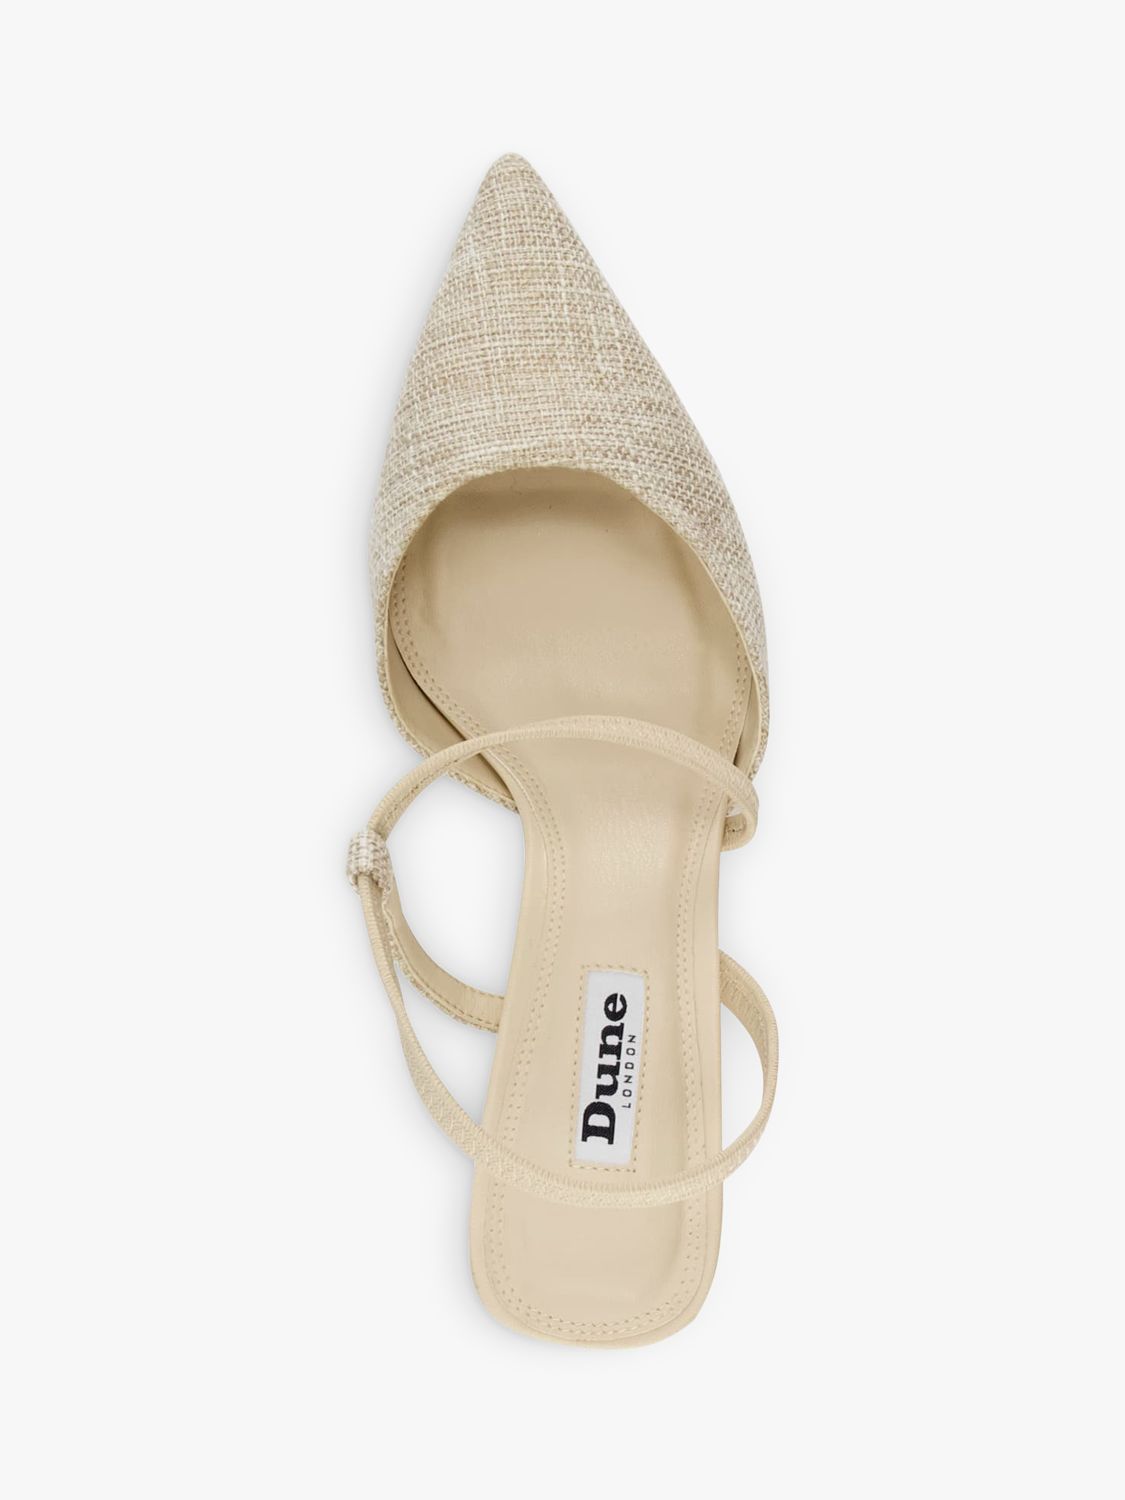 Dune Colombia Fabric Slingback Court Shoes, Neutral